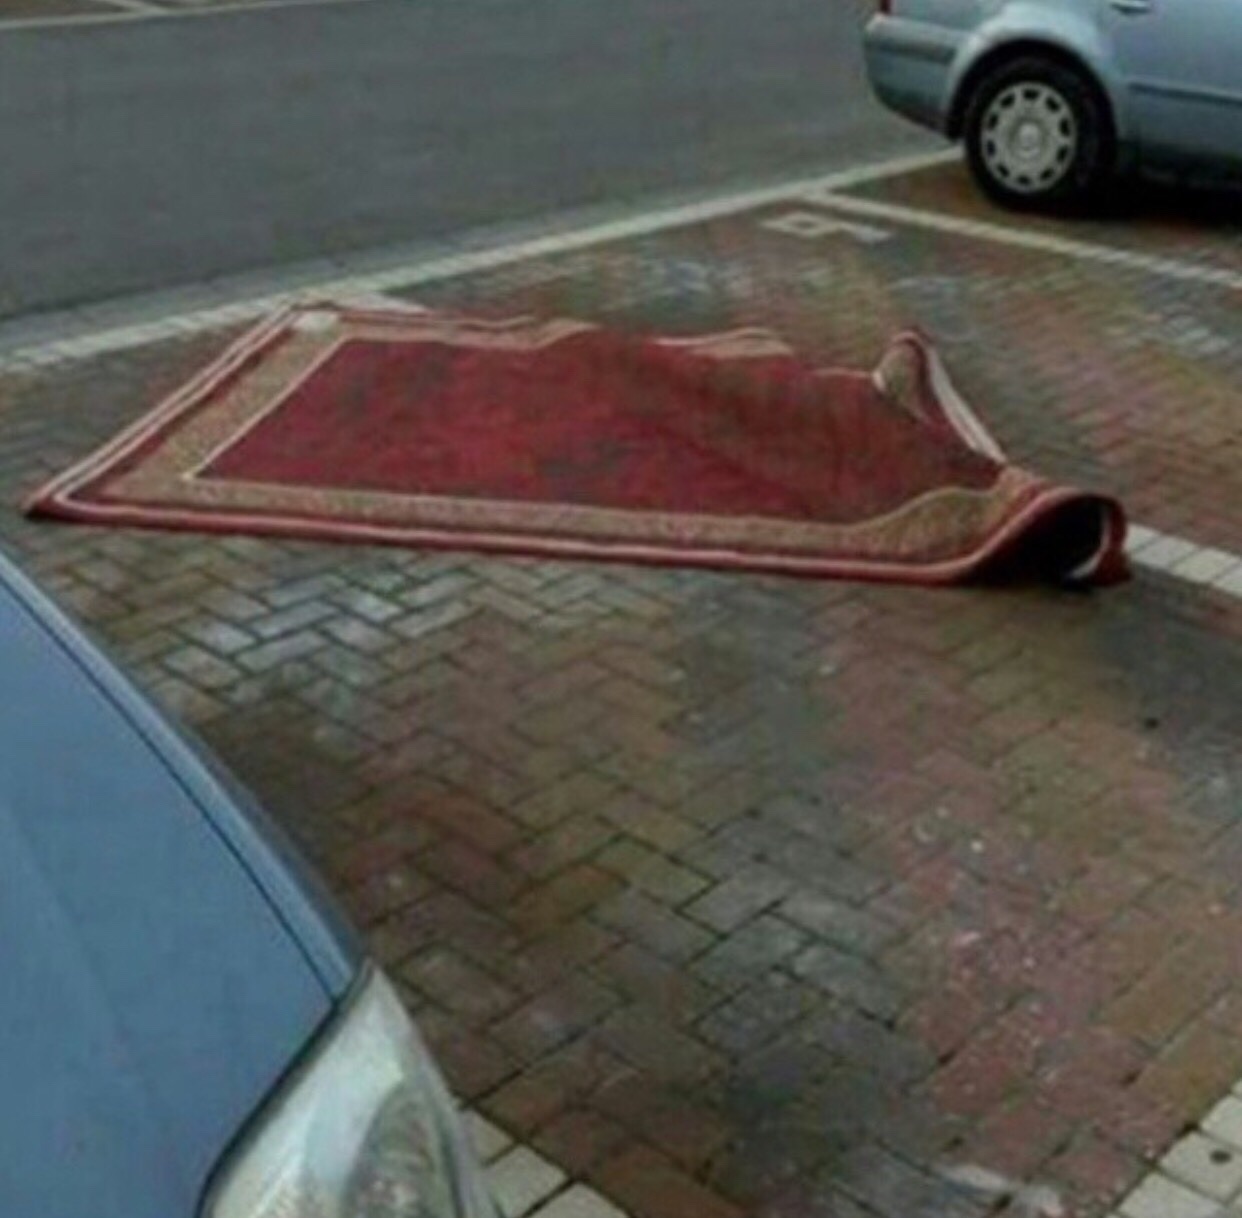 Aladdin Parks Like An Asshole - Funny pictures